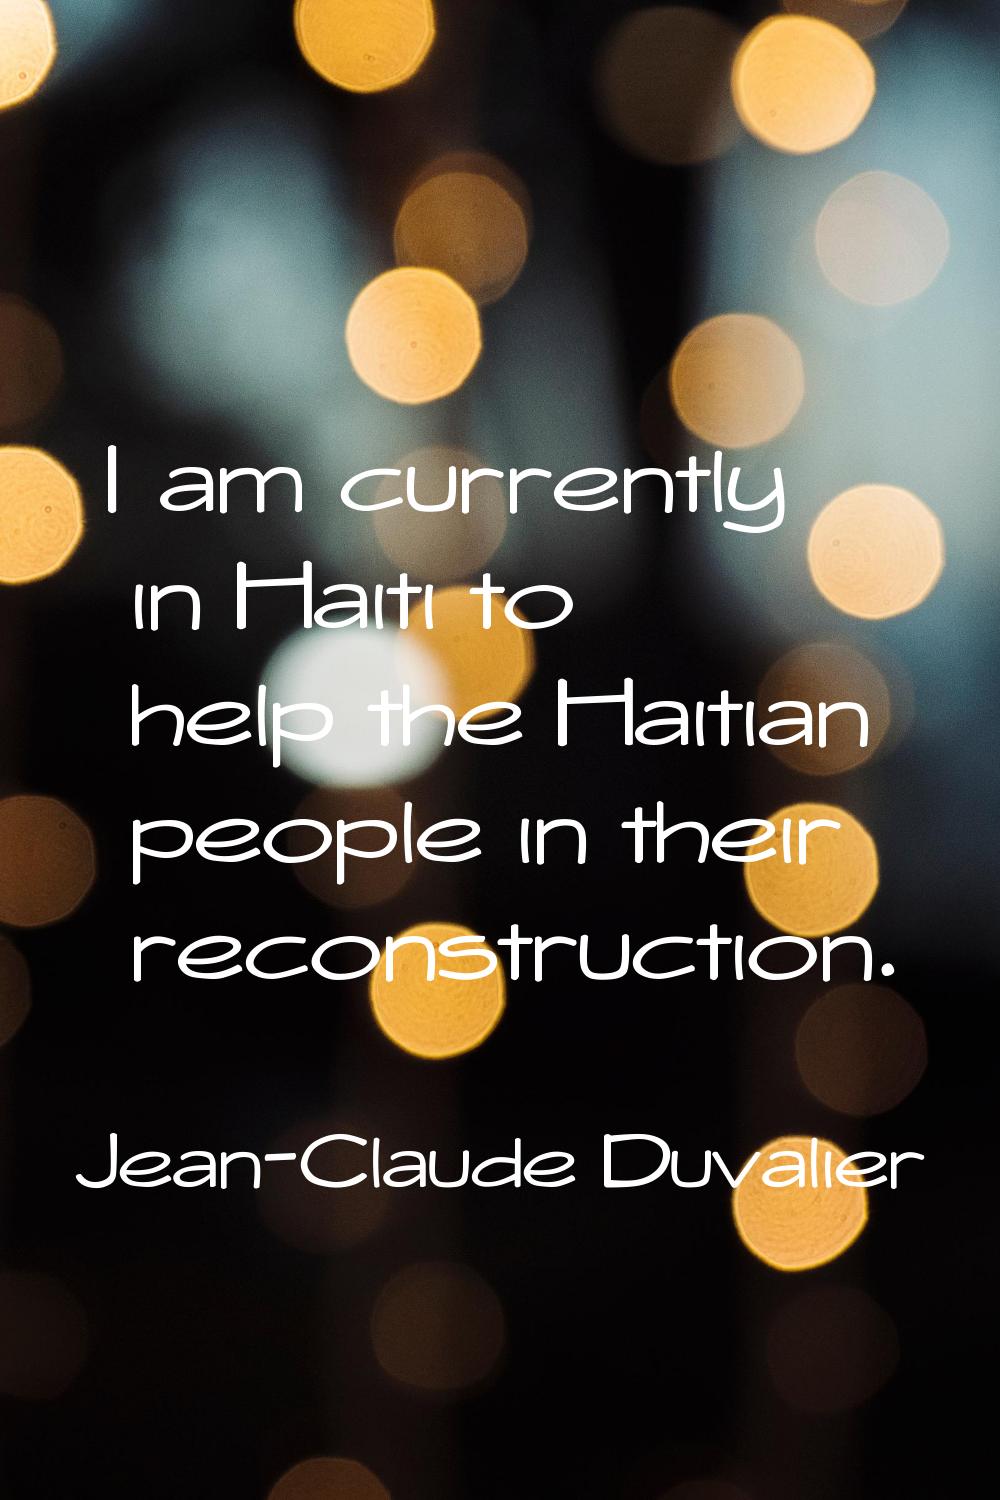 I am currently in Haiti to help the Haitian people in their reconstruction.